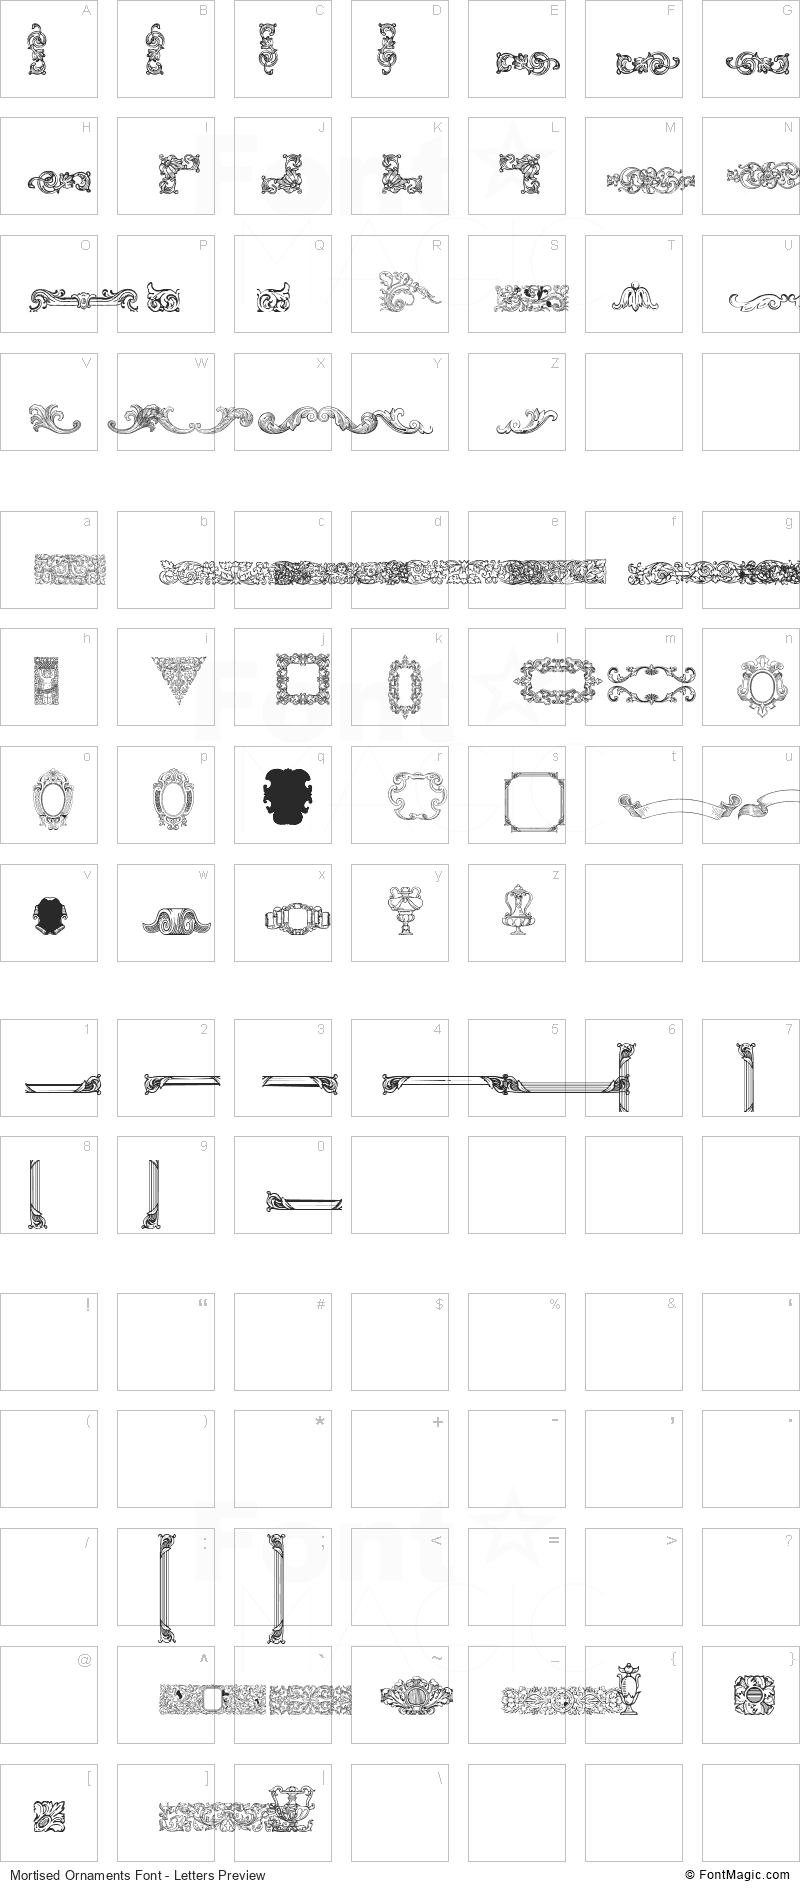 Mortised Ornaments Font - All Latters Preview Chart